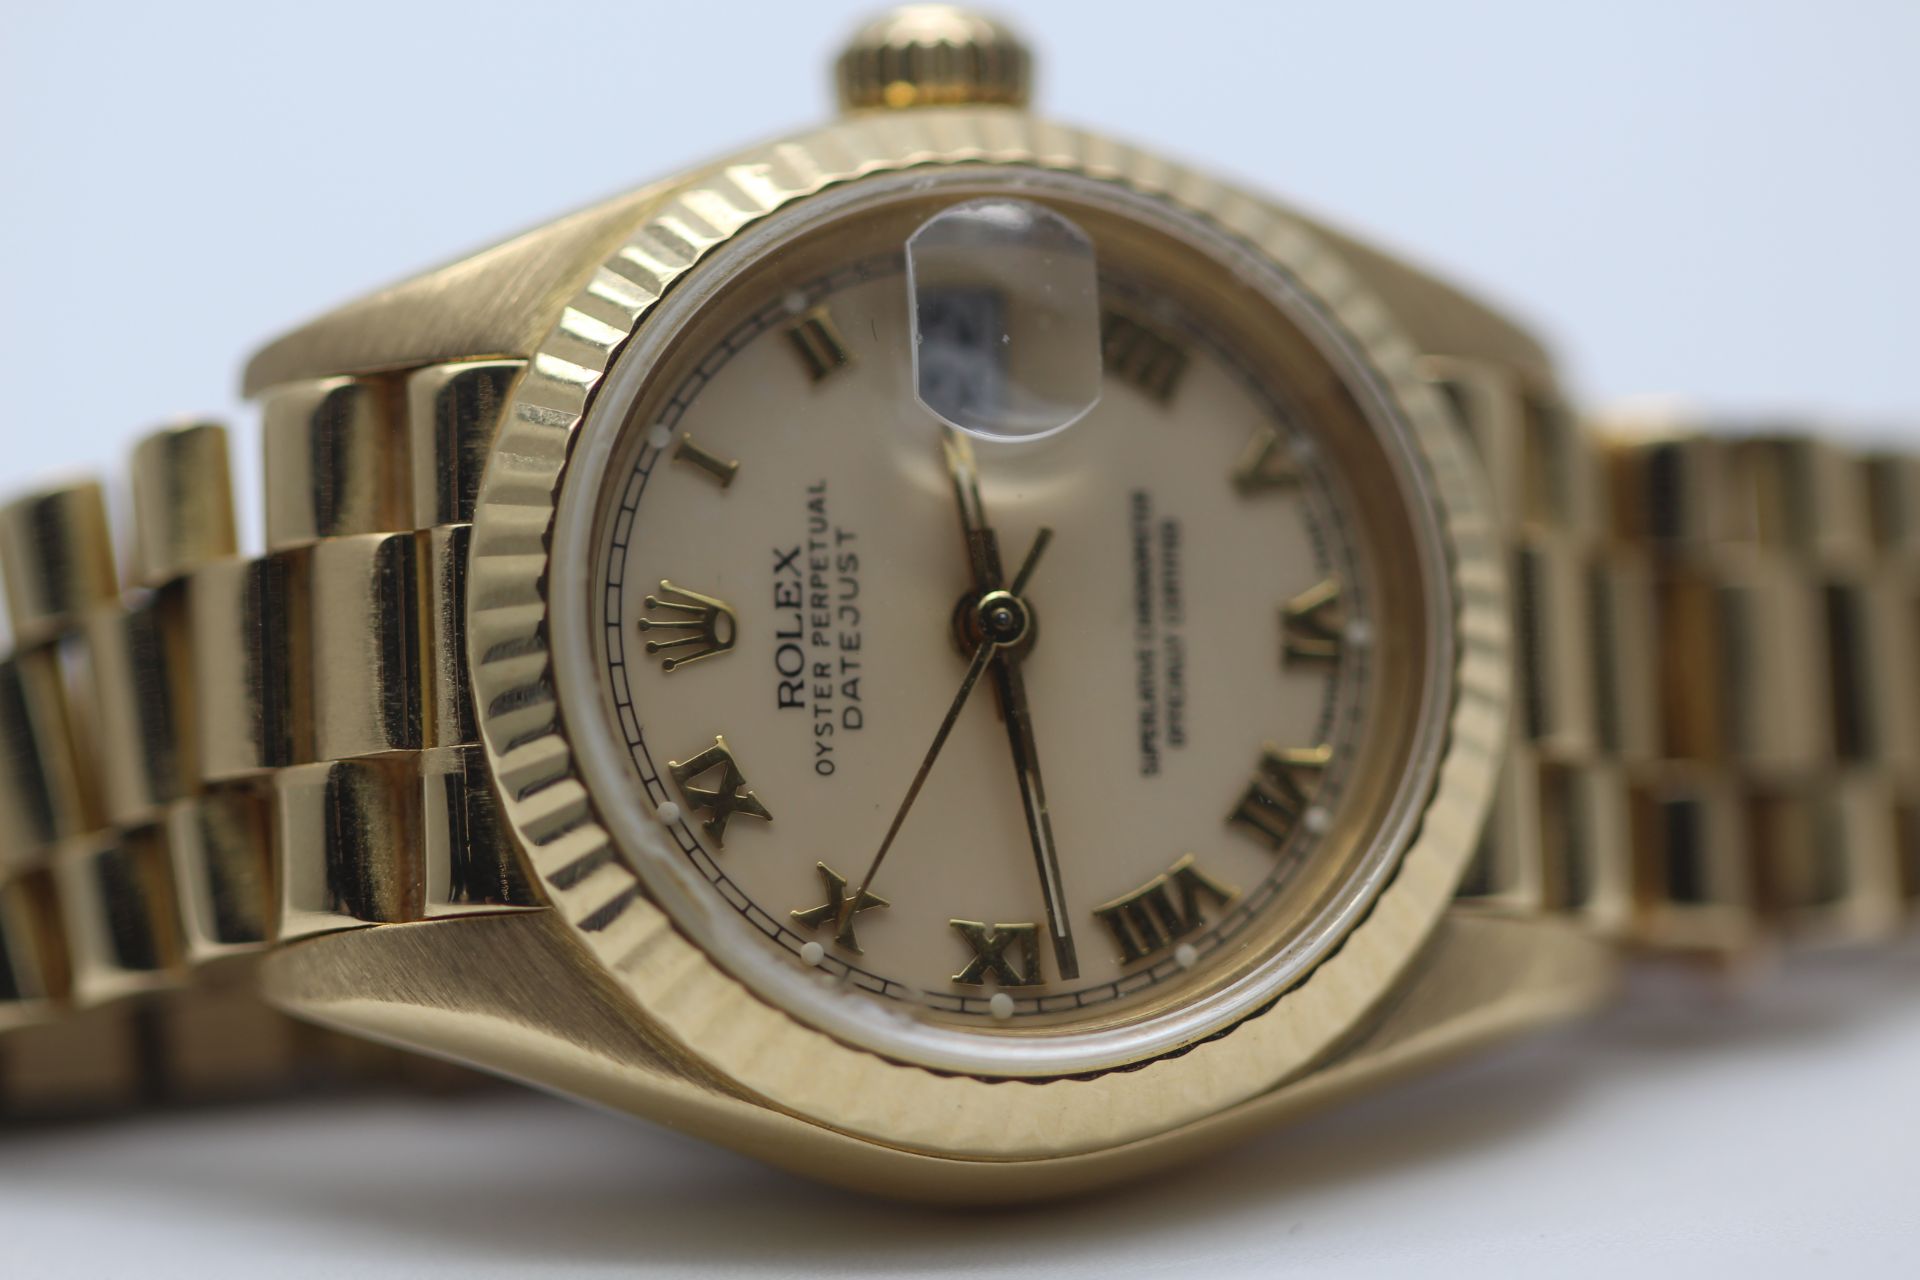 ROLEX, LADIES 18CT GOLD DATEJUST SET WITH CREME DIAL - Image 3 of 9